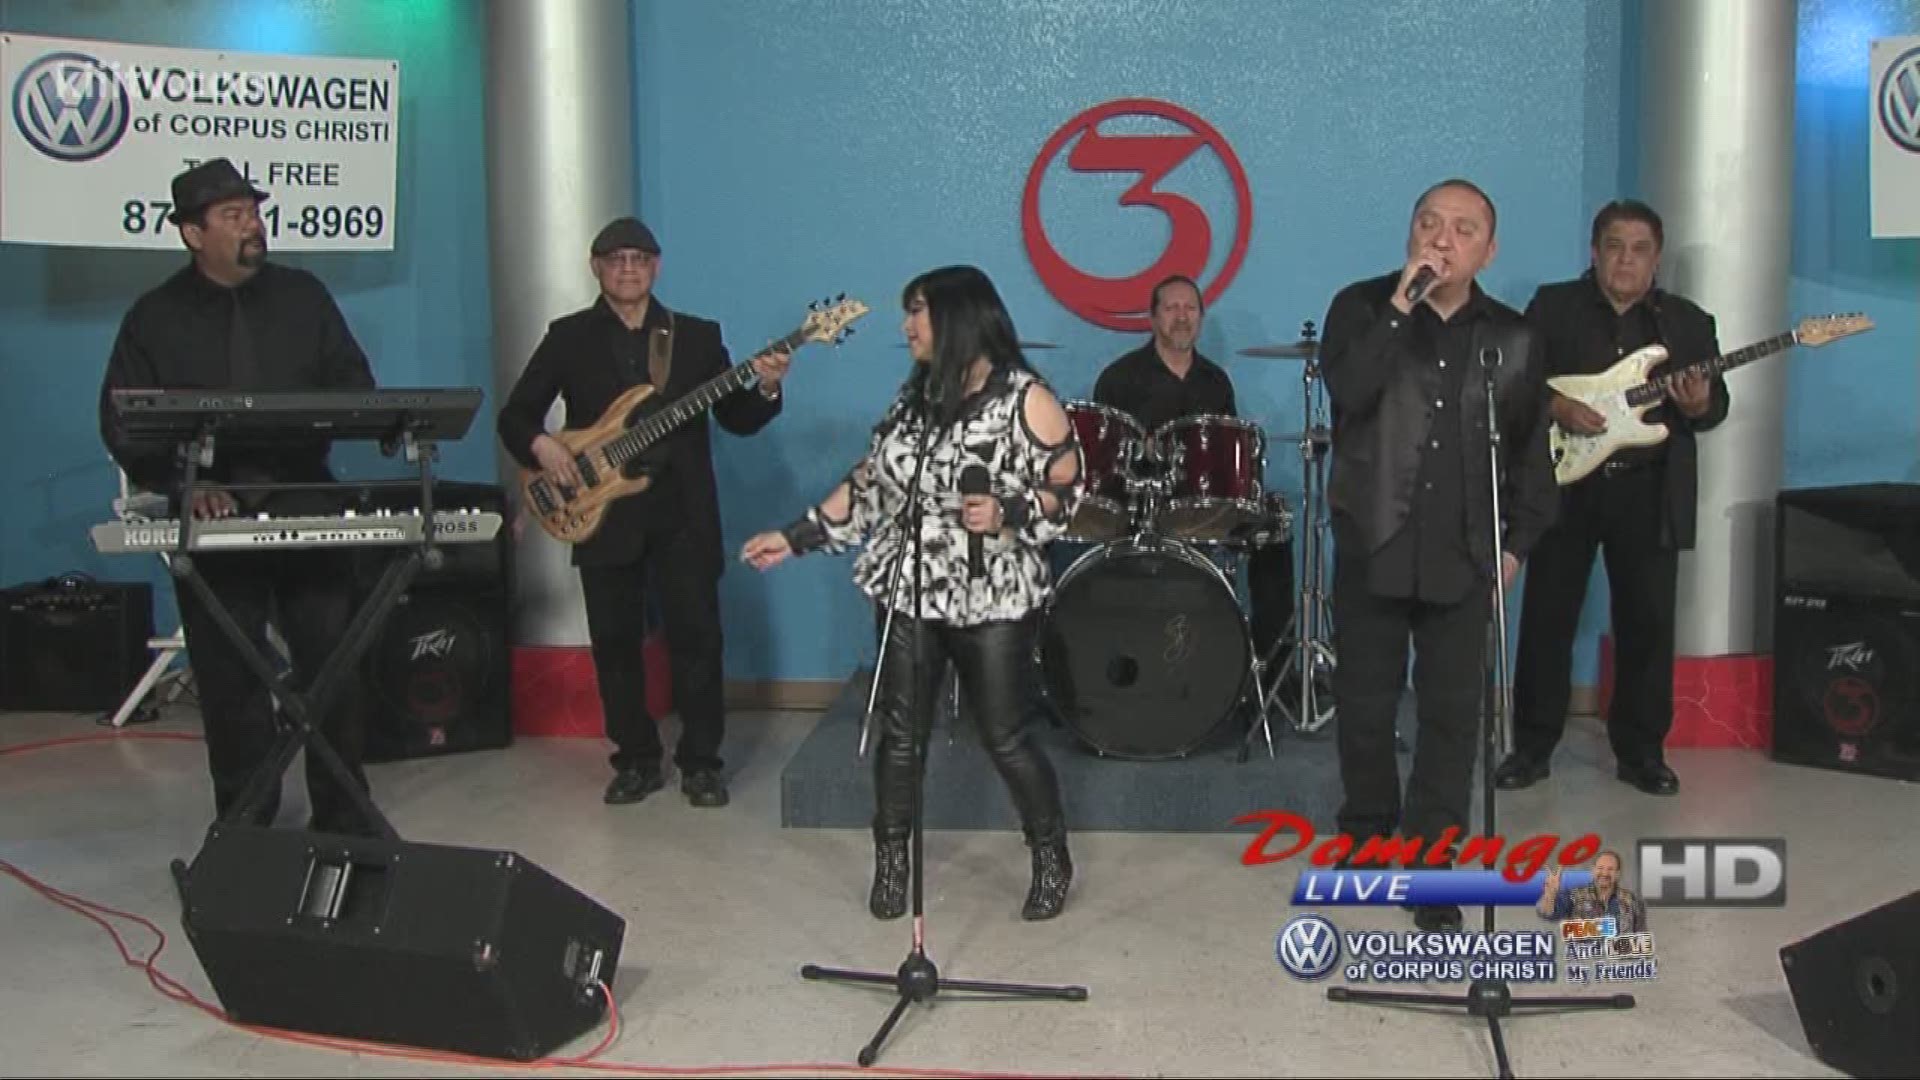 Sound Rave Band performing "Slowly But Surely" on Domingo Live!